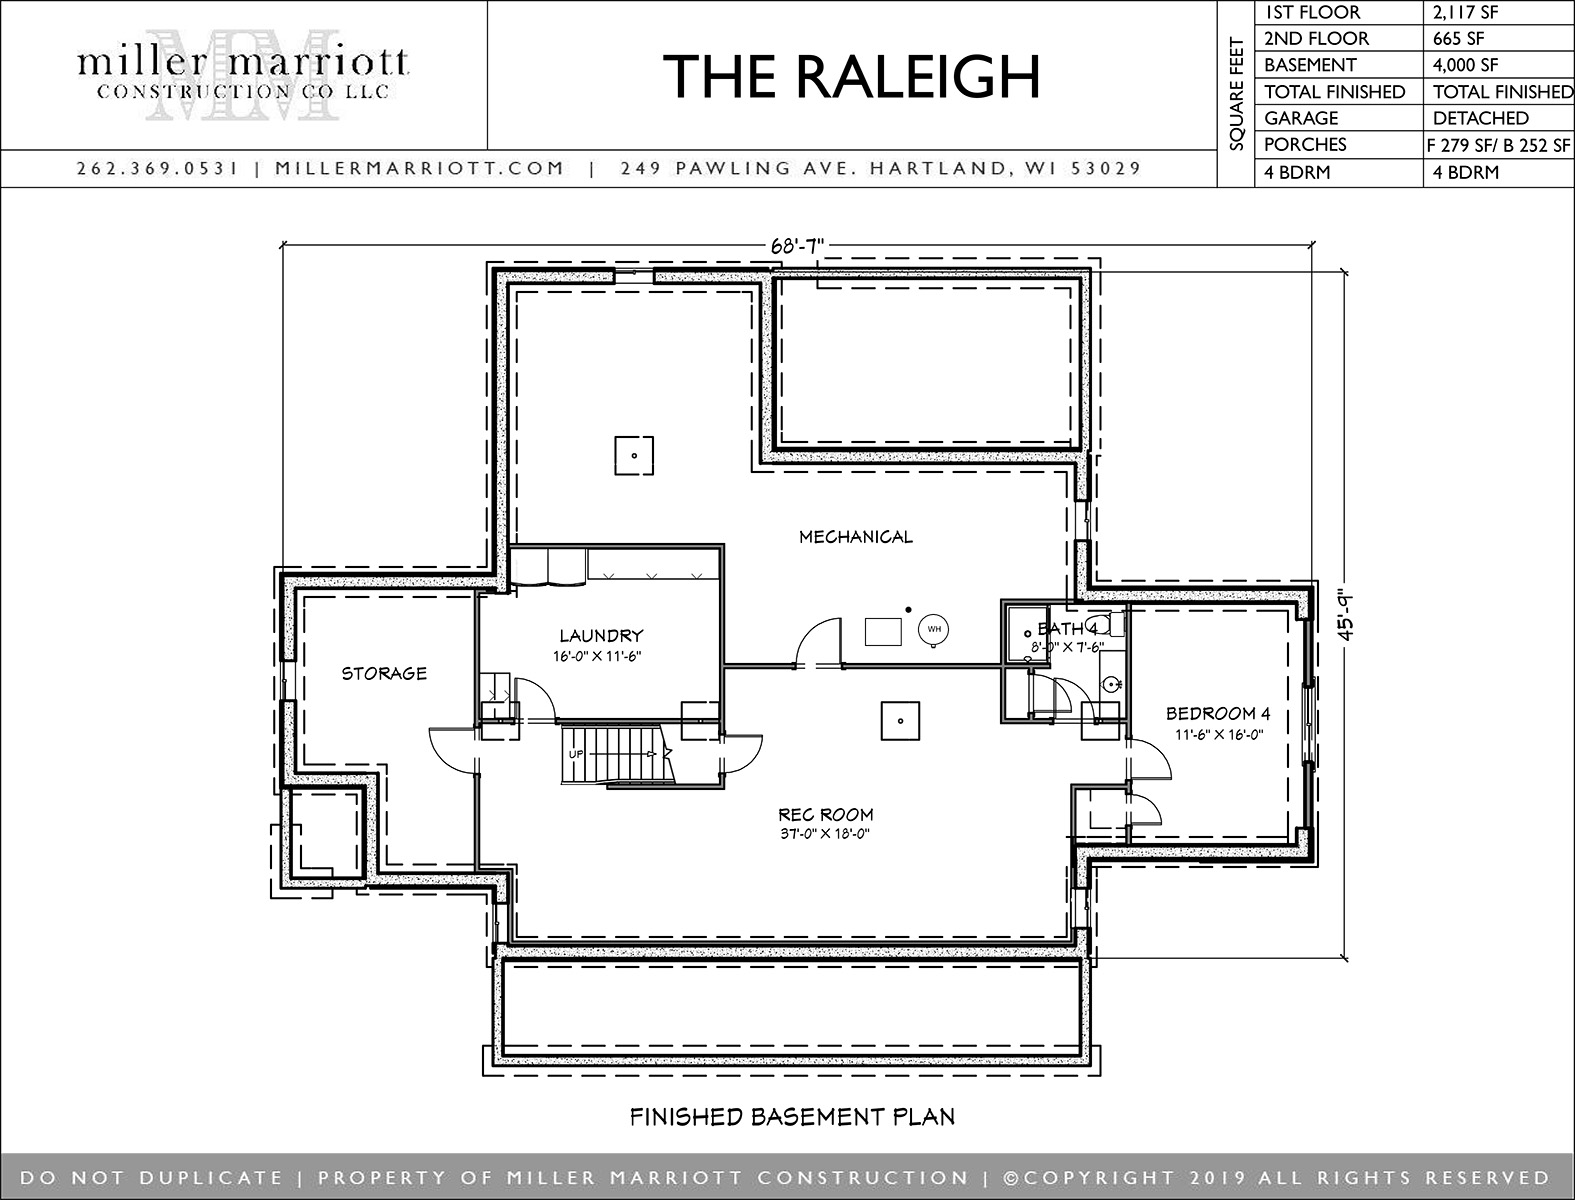 The Raleigh - Finished Basement Plan